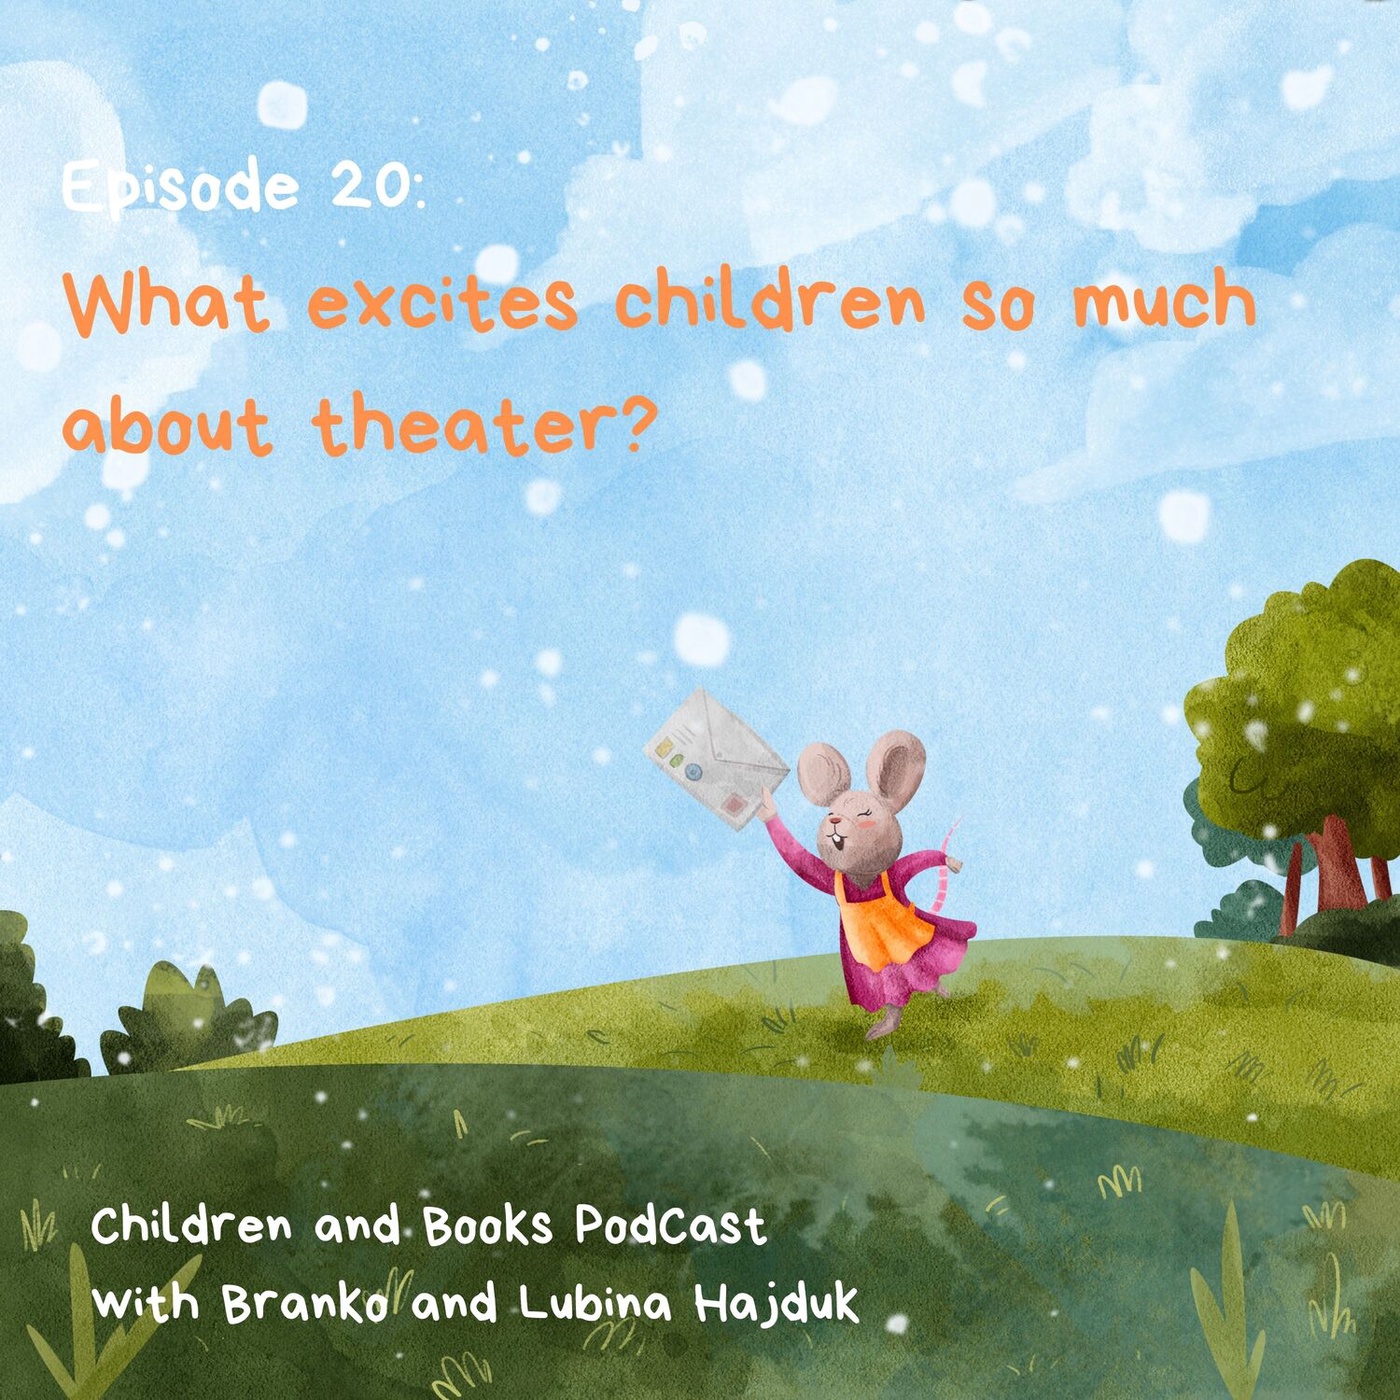 What excites children so much about theater? - Children and books